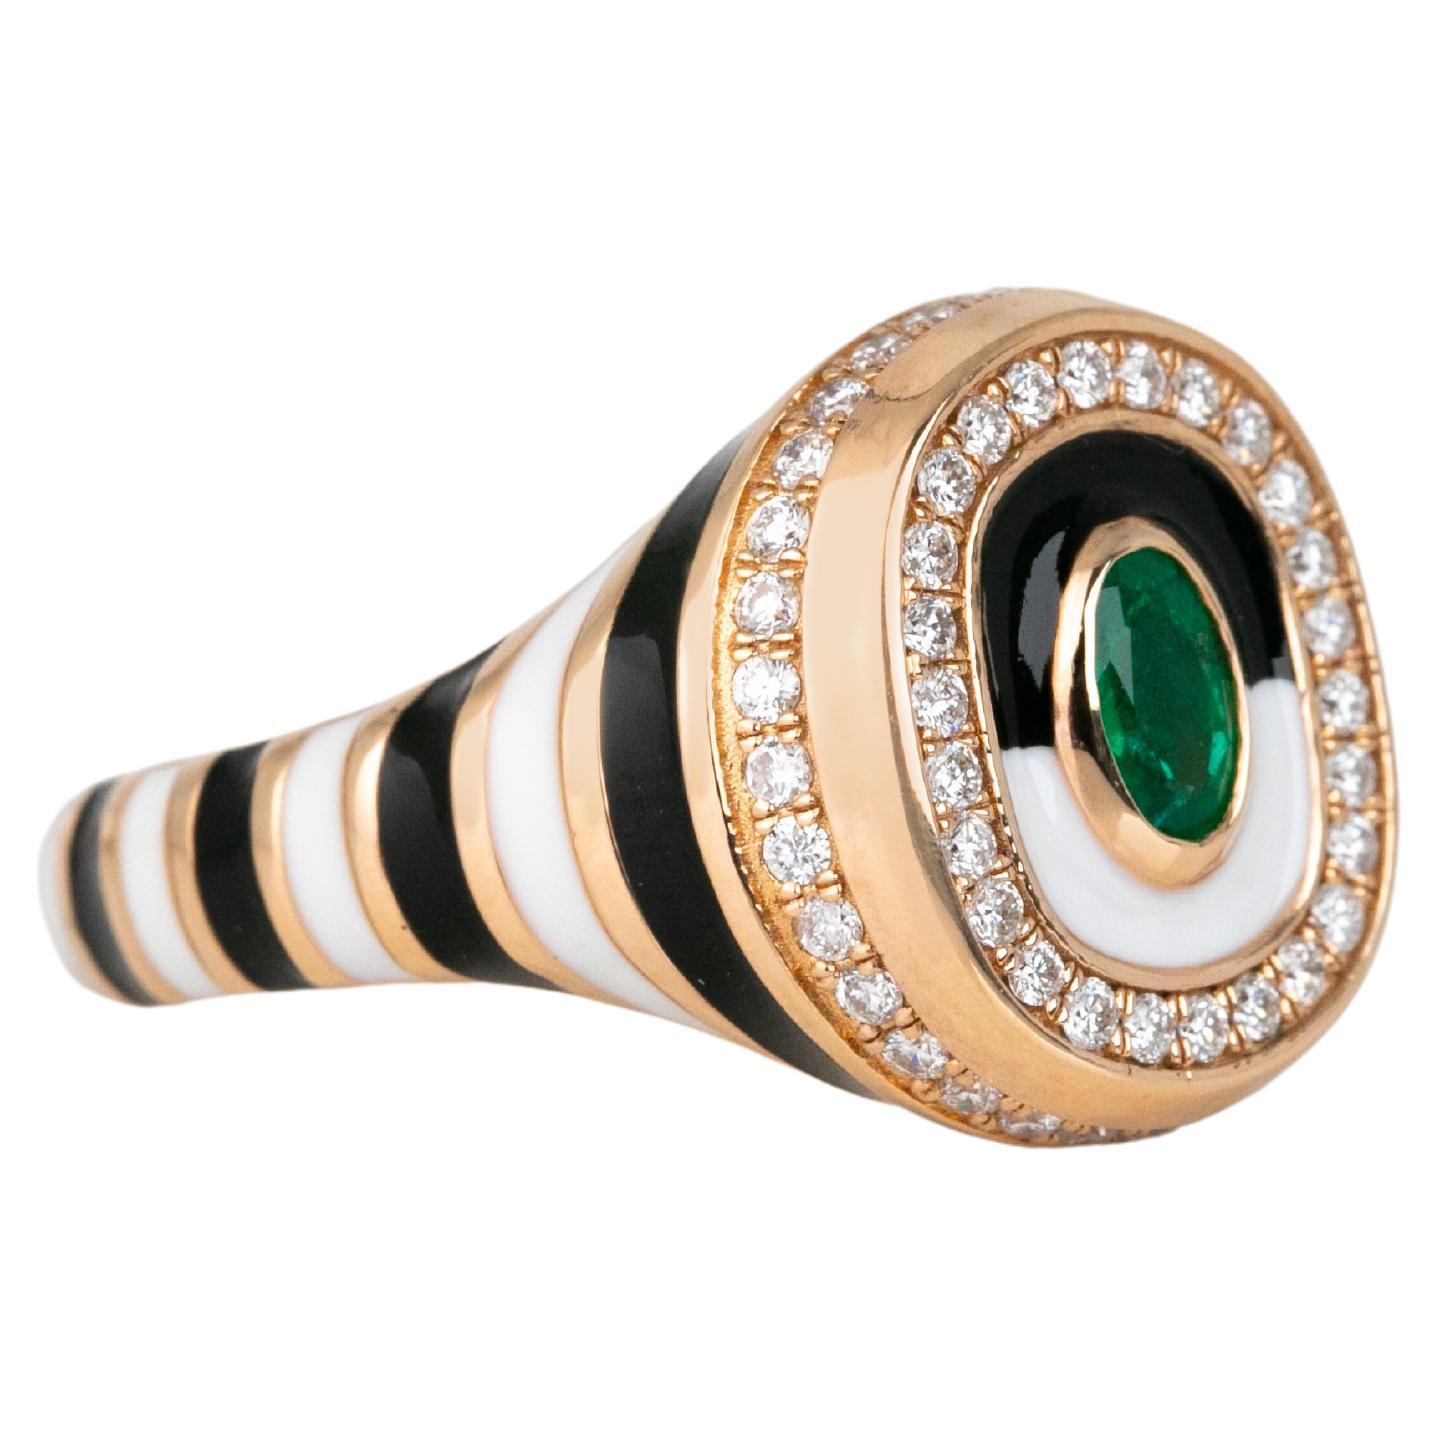 For Sale:  14K Gold 0.43 Ct Emerald & Diamond Enameled Cocktail Ring, Chevalier Ring 2